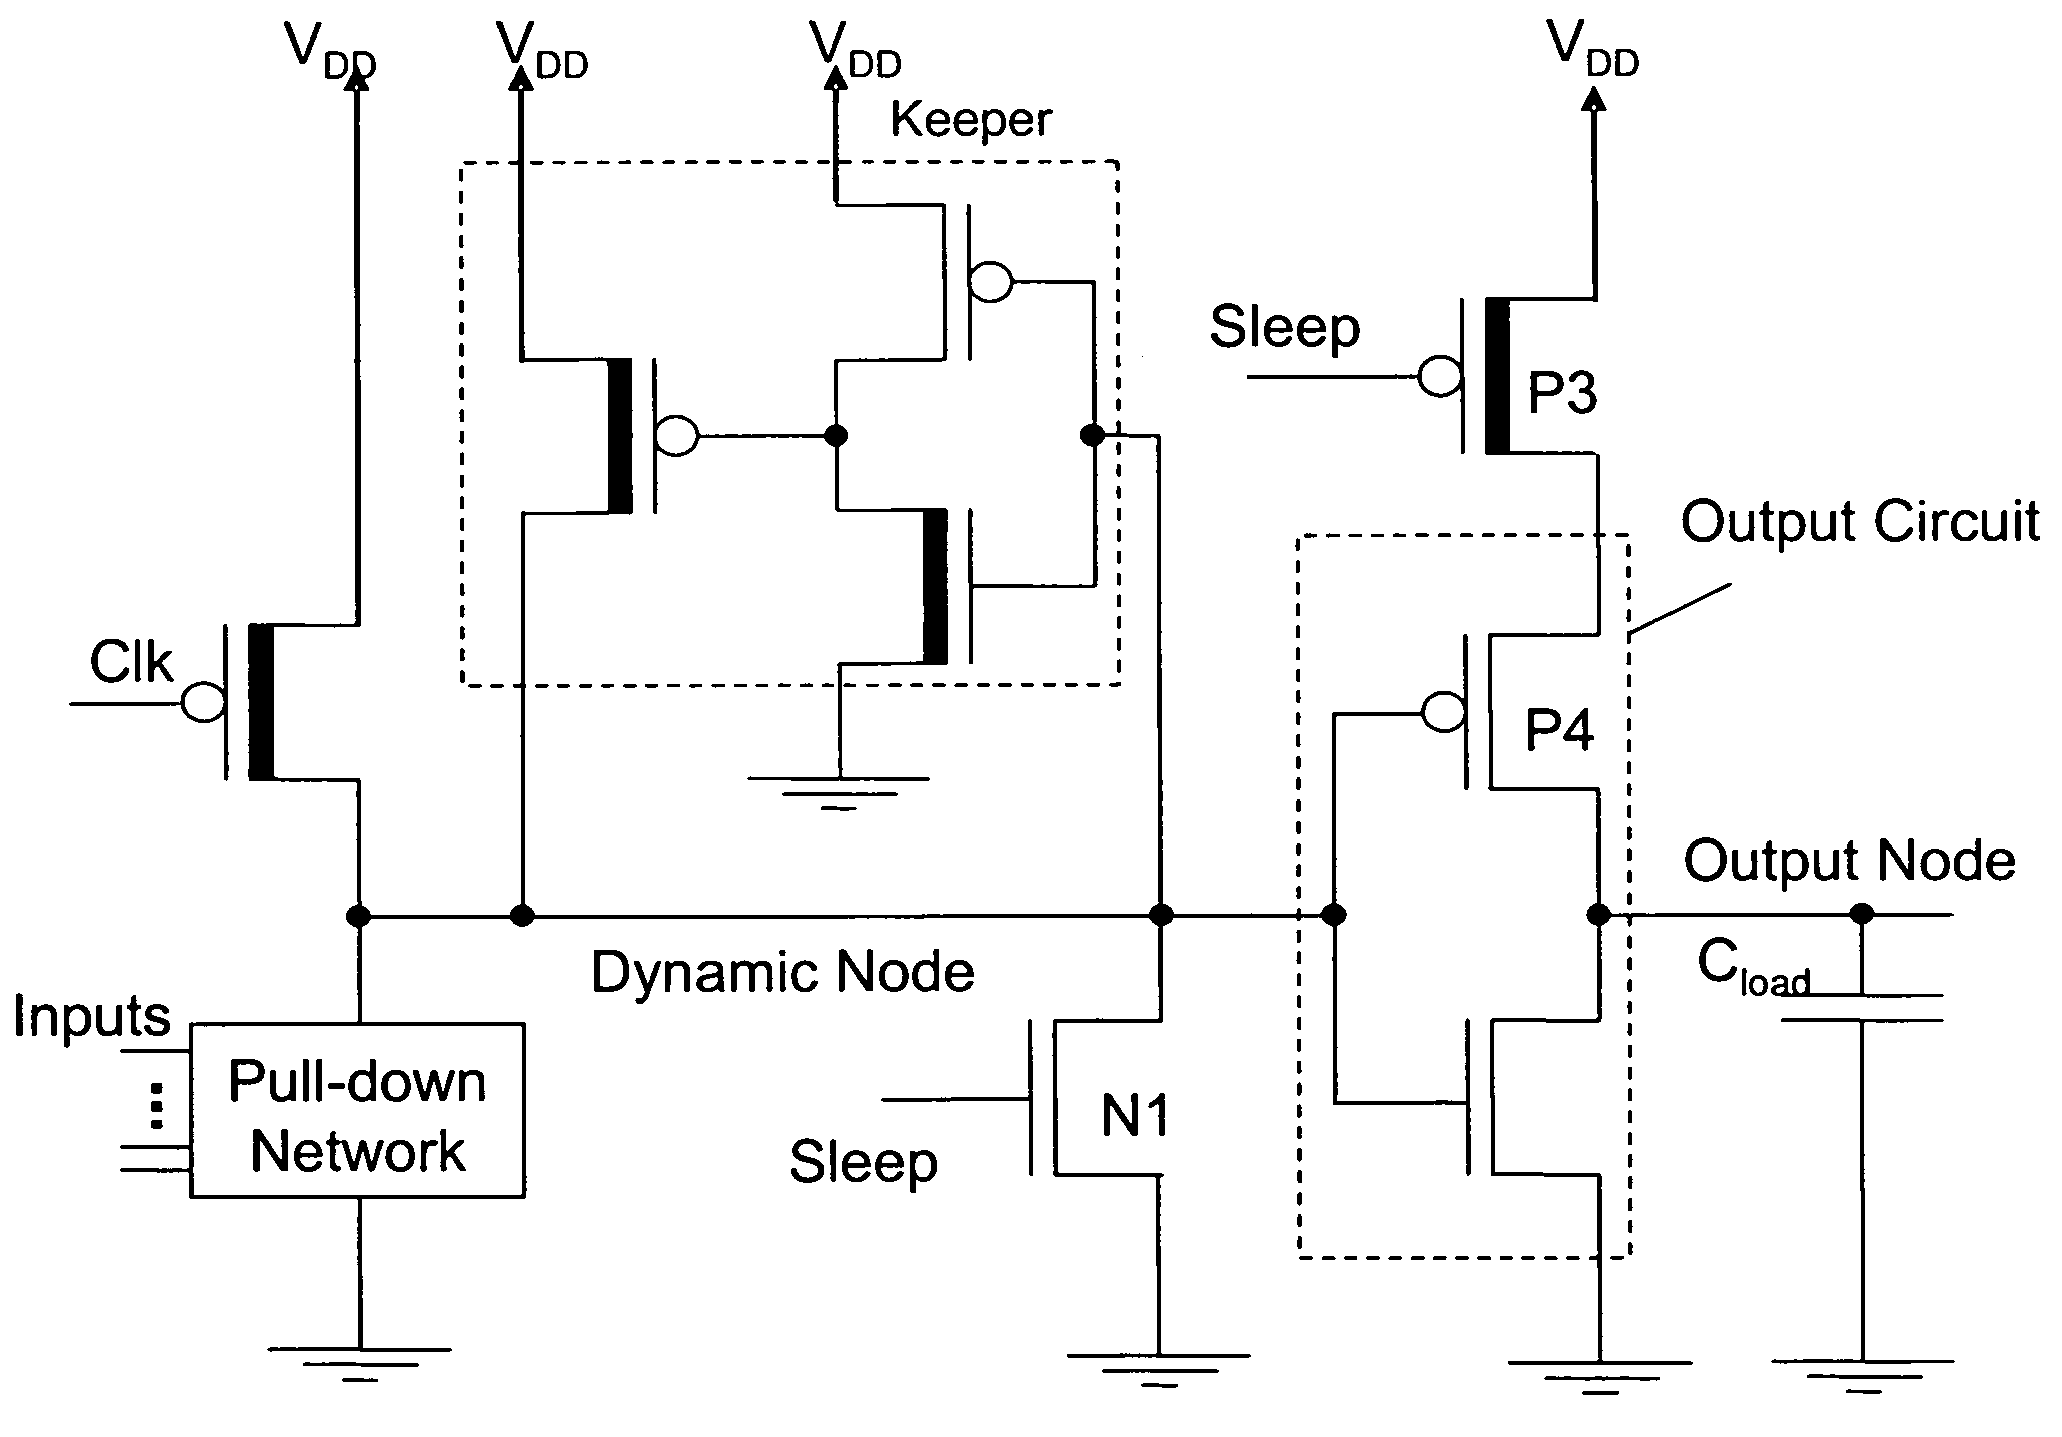 Domino logic circuit techniques for suppressing subthreshold and gate oxide leakage